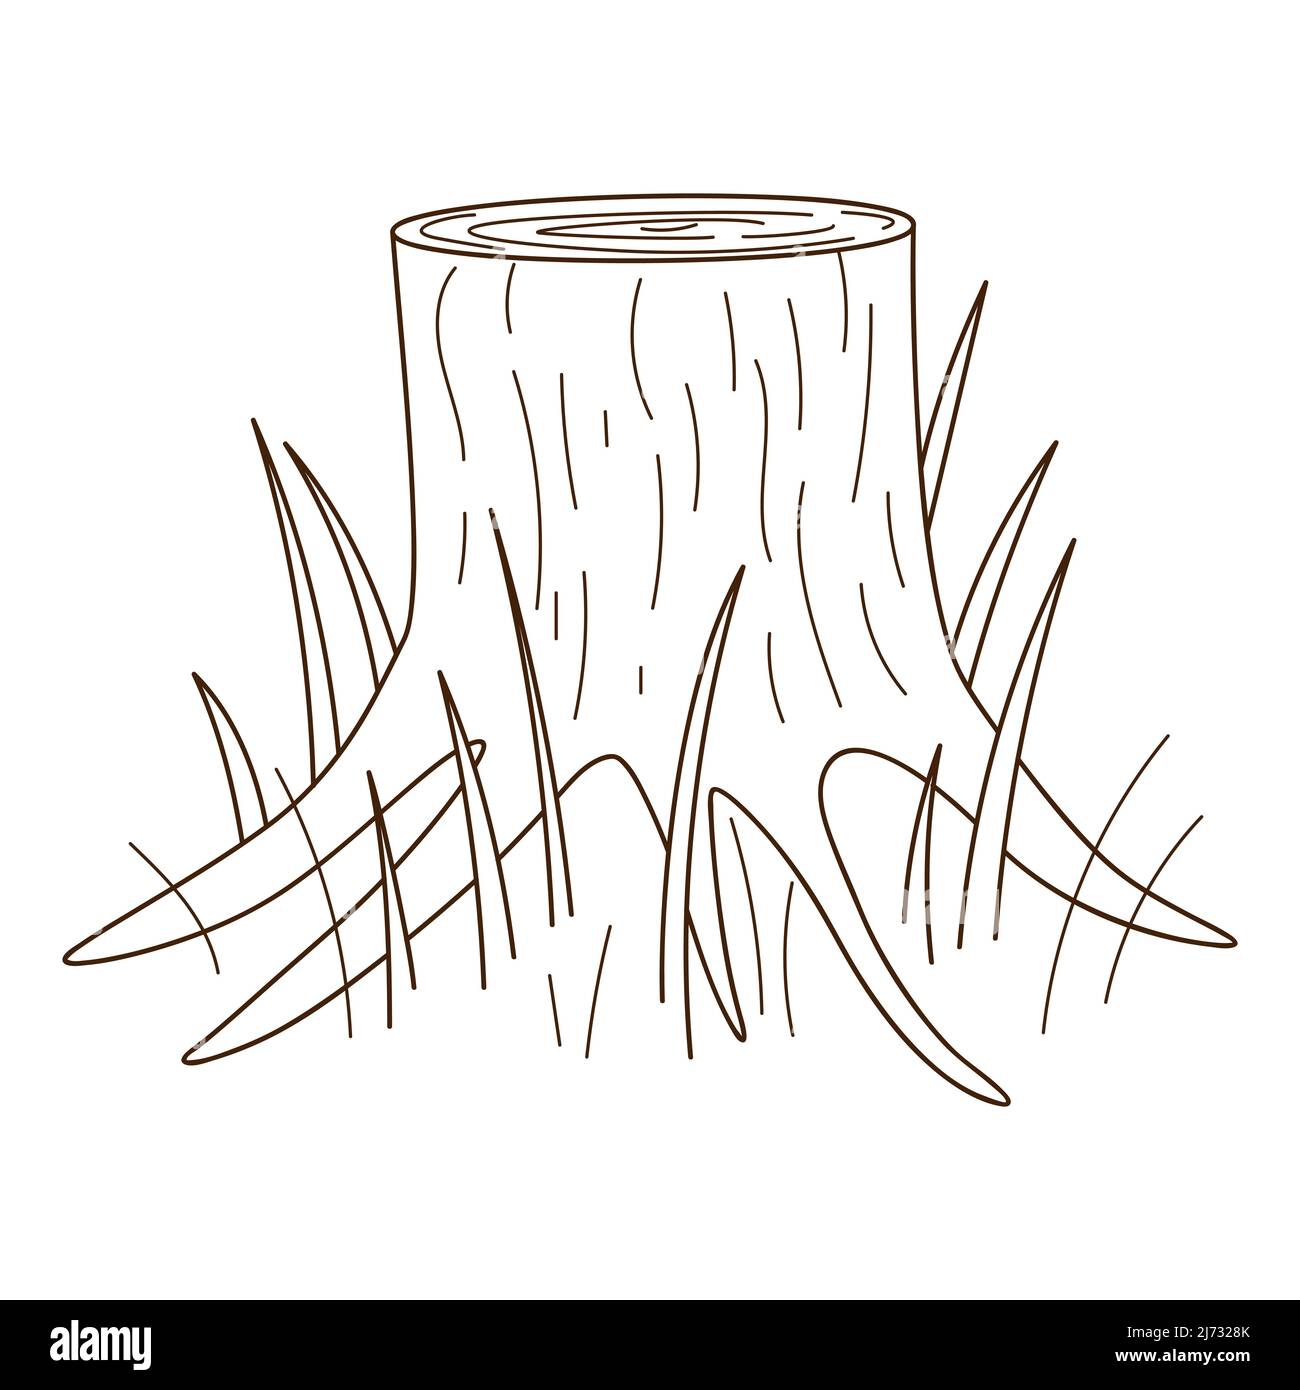 A stump of a tree. Forest, nature. Decorative element with an outline. Doodle, hand-drawn. Black white vector illustration. Isolated on a white backgr Stock Vector